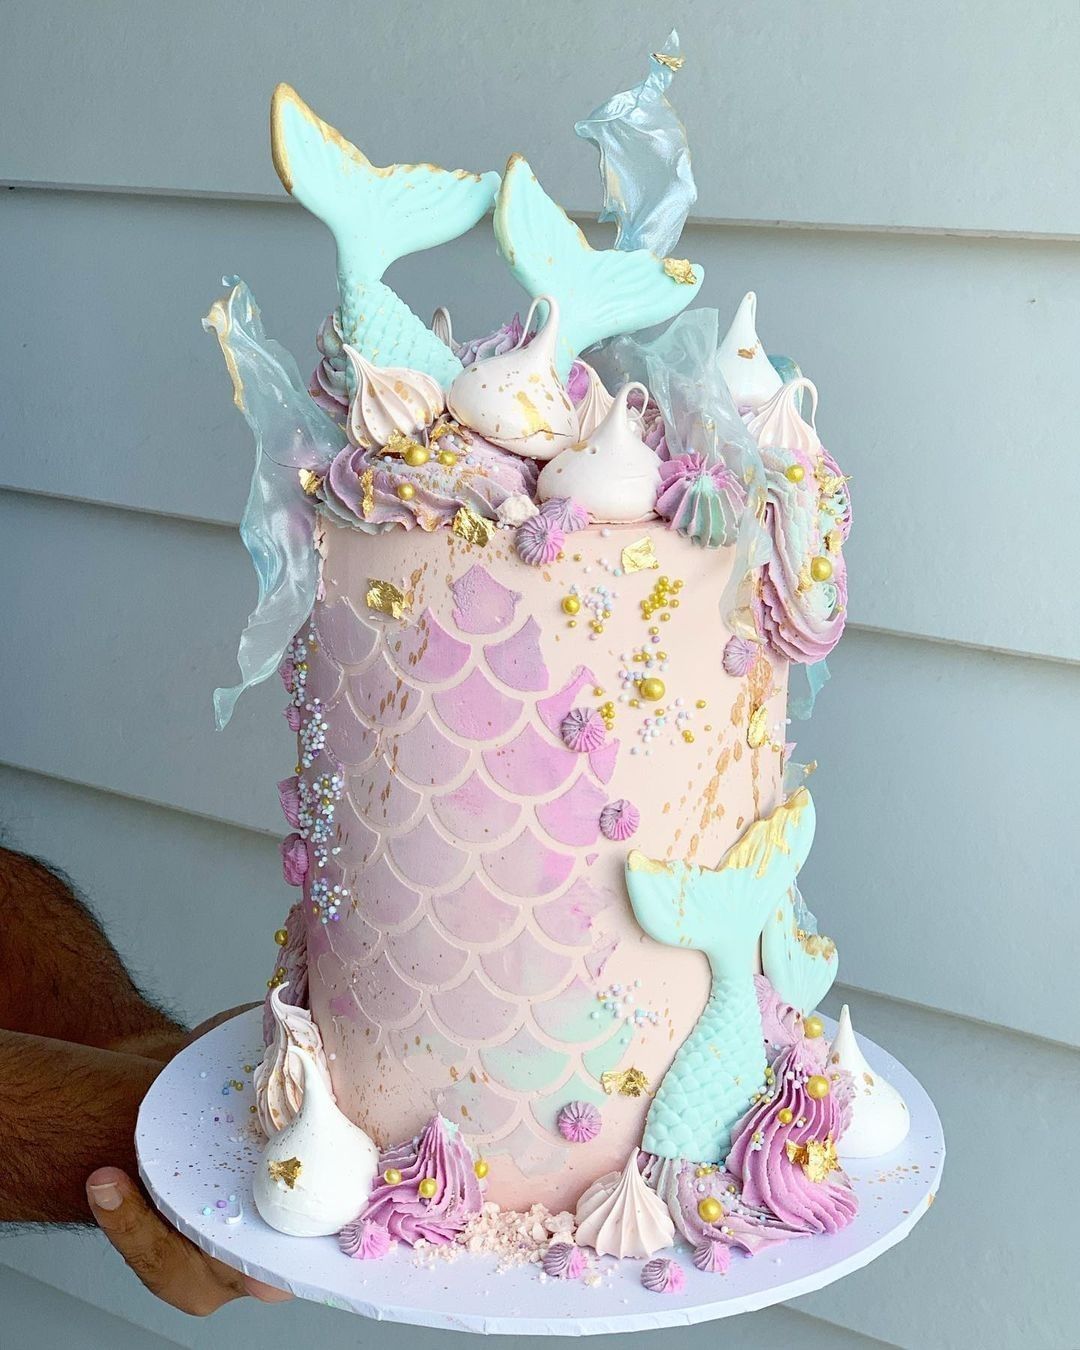 mermaid-cakes-acrylic-topper-custom-design-melbourne-yarraville | Miss  Noble Melbourne: Specialty Cakes, Desserts, Events, Classes